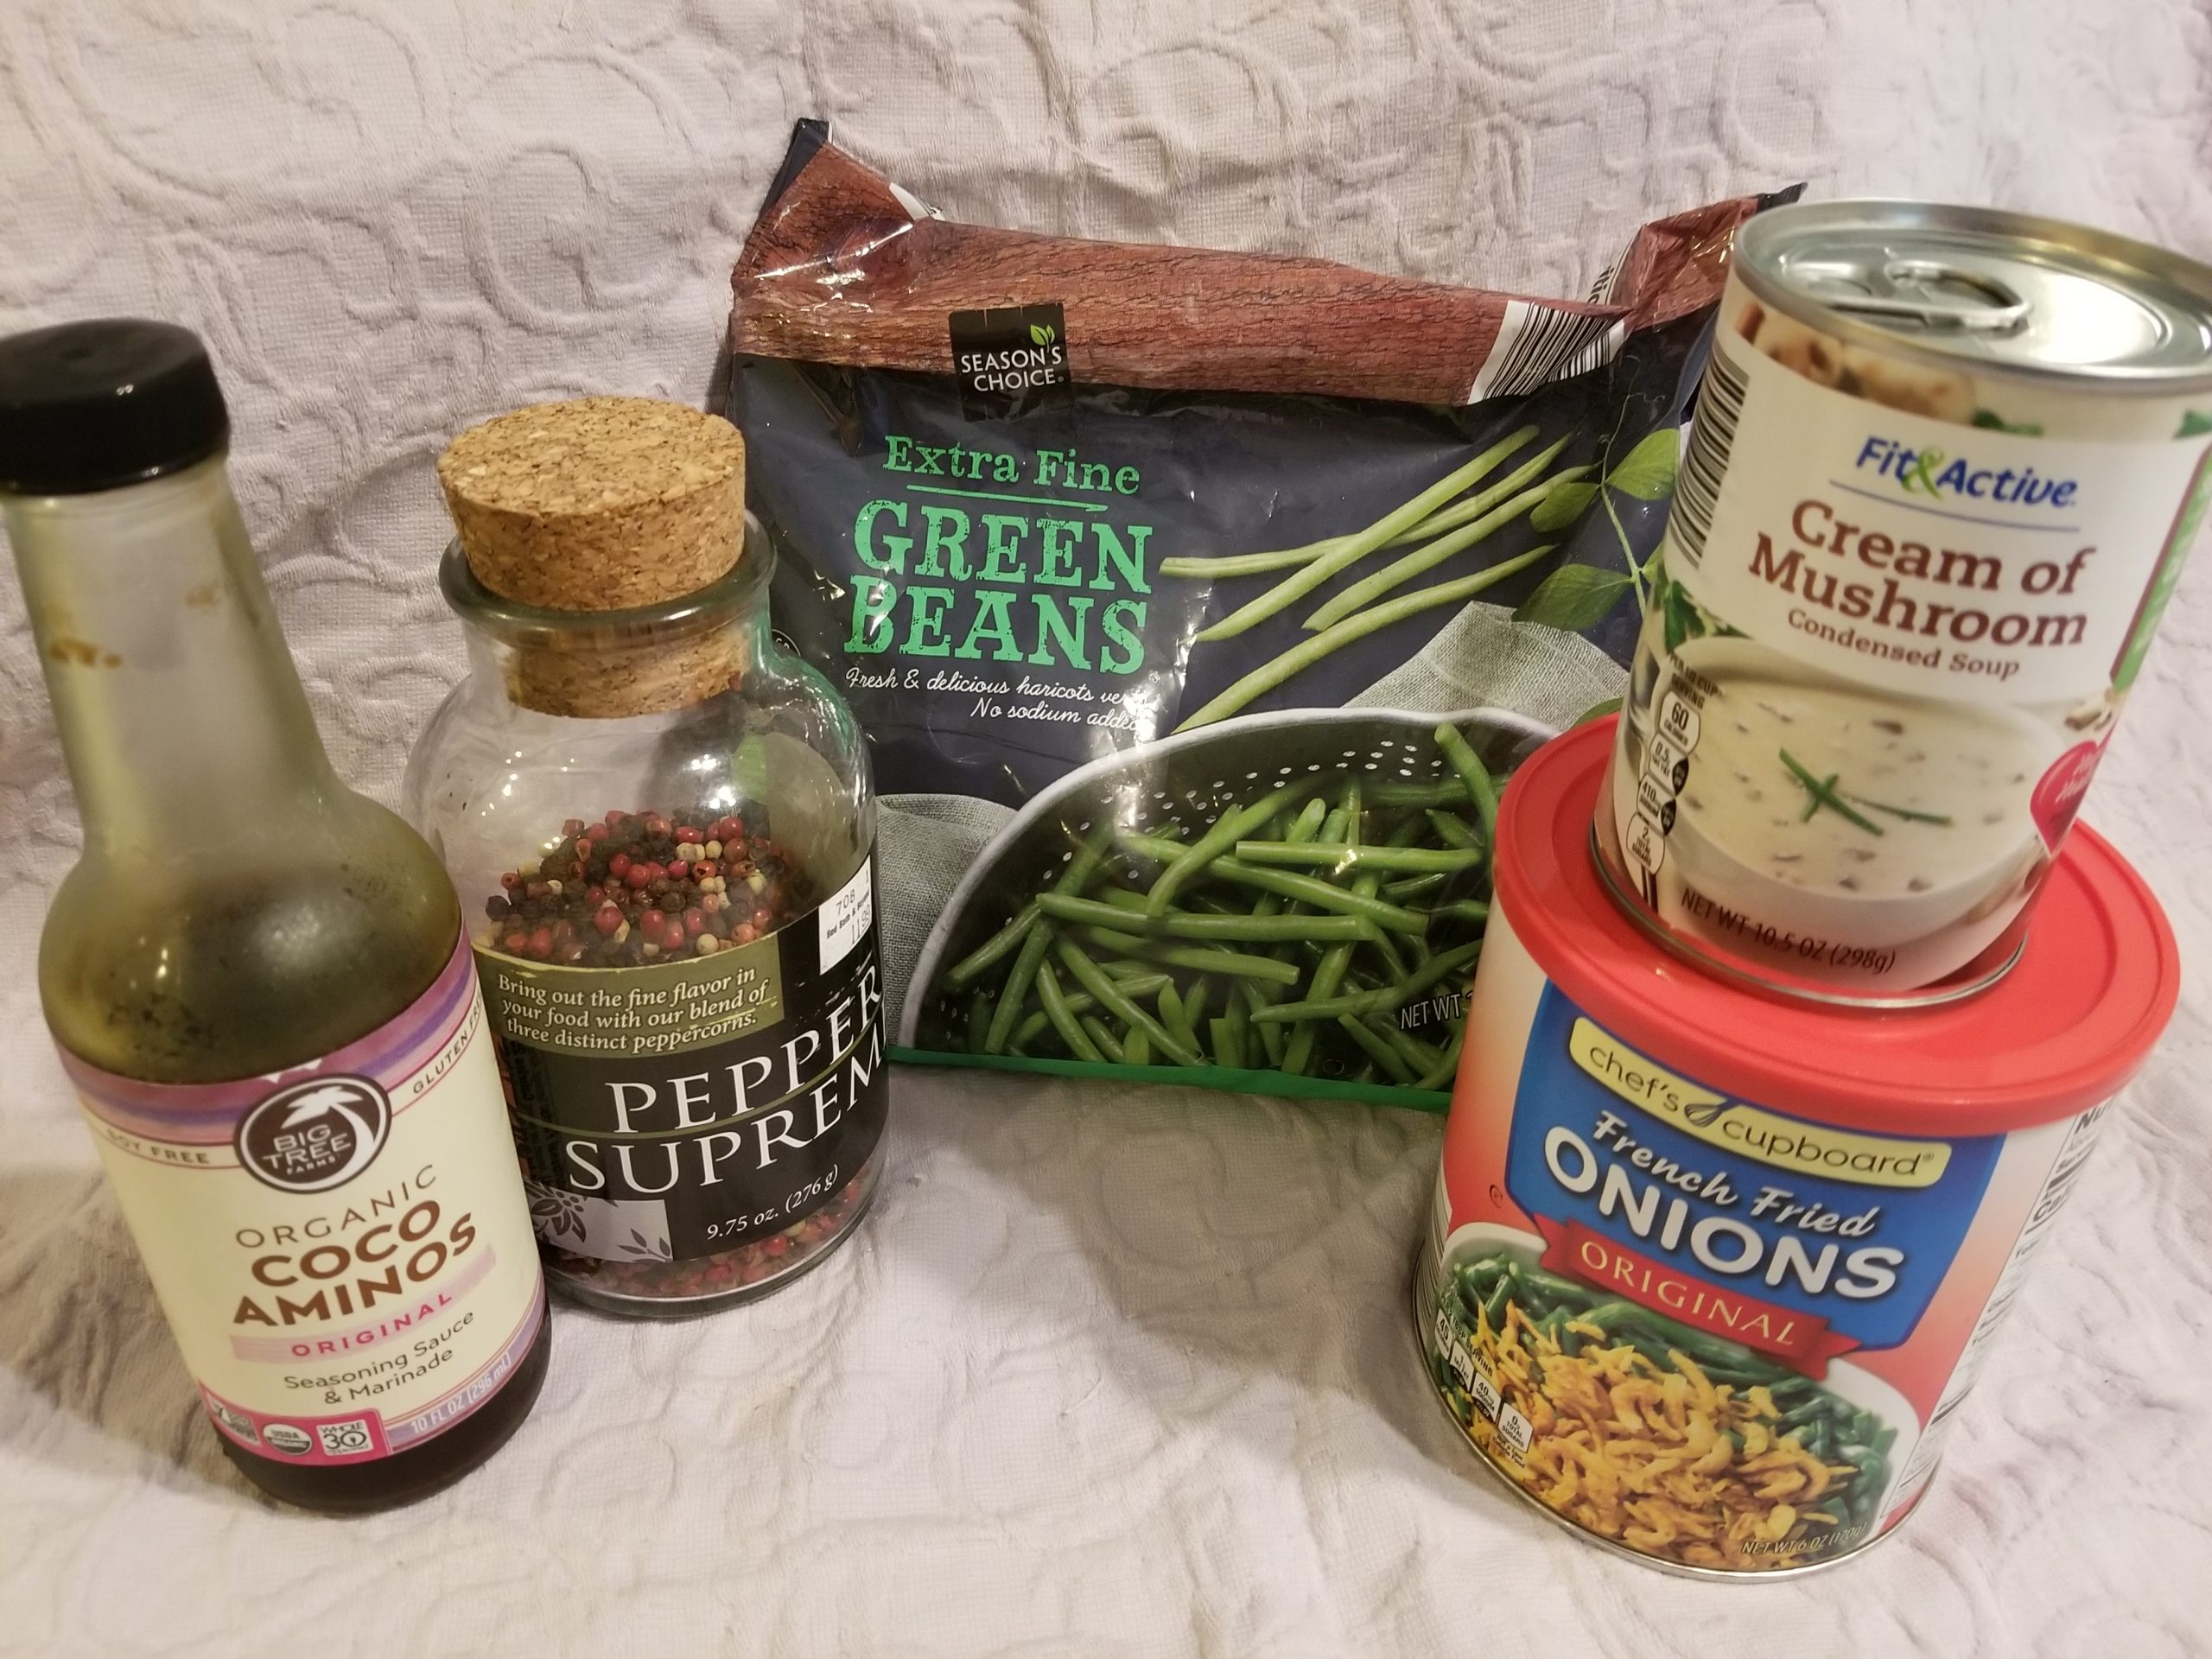 Ingredients for making green bean casserole